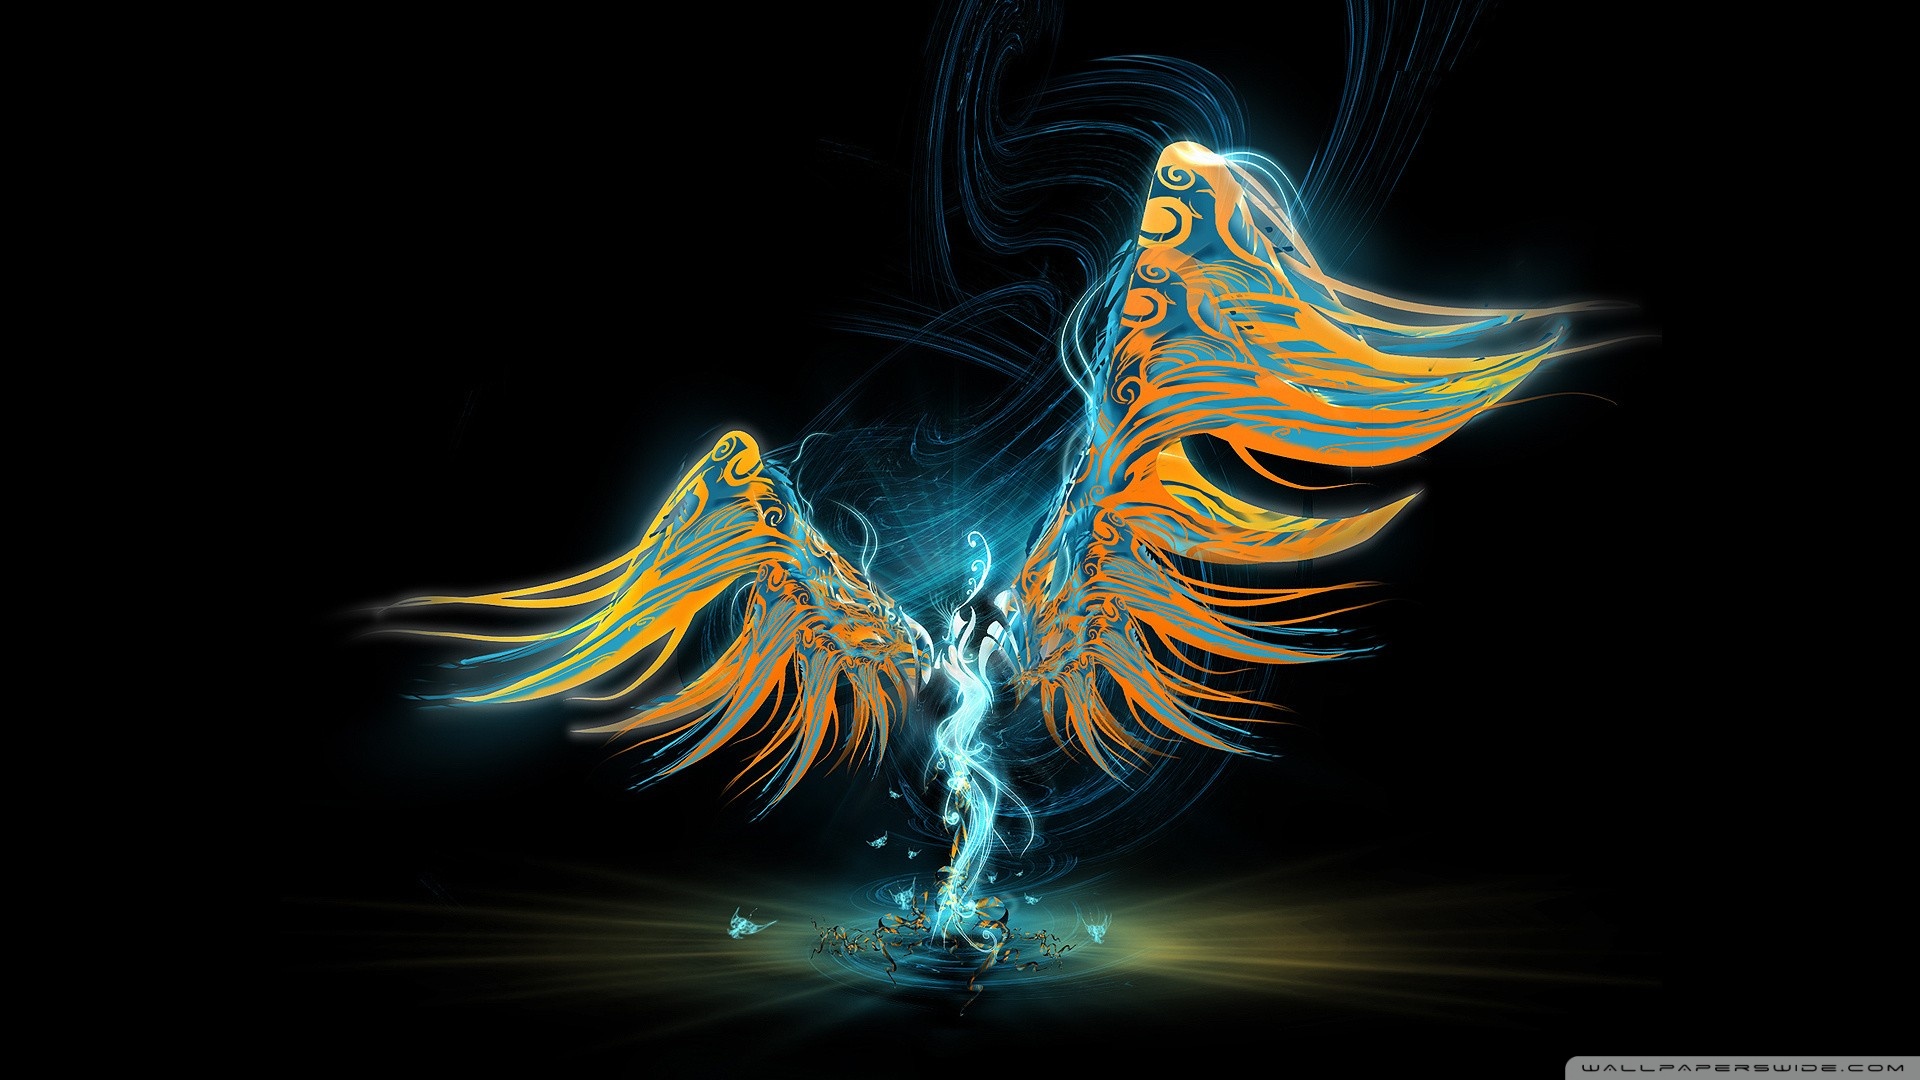 Abstract Angel Wallpaper 1920x1080 Abstract Angel